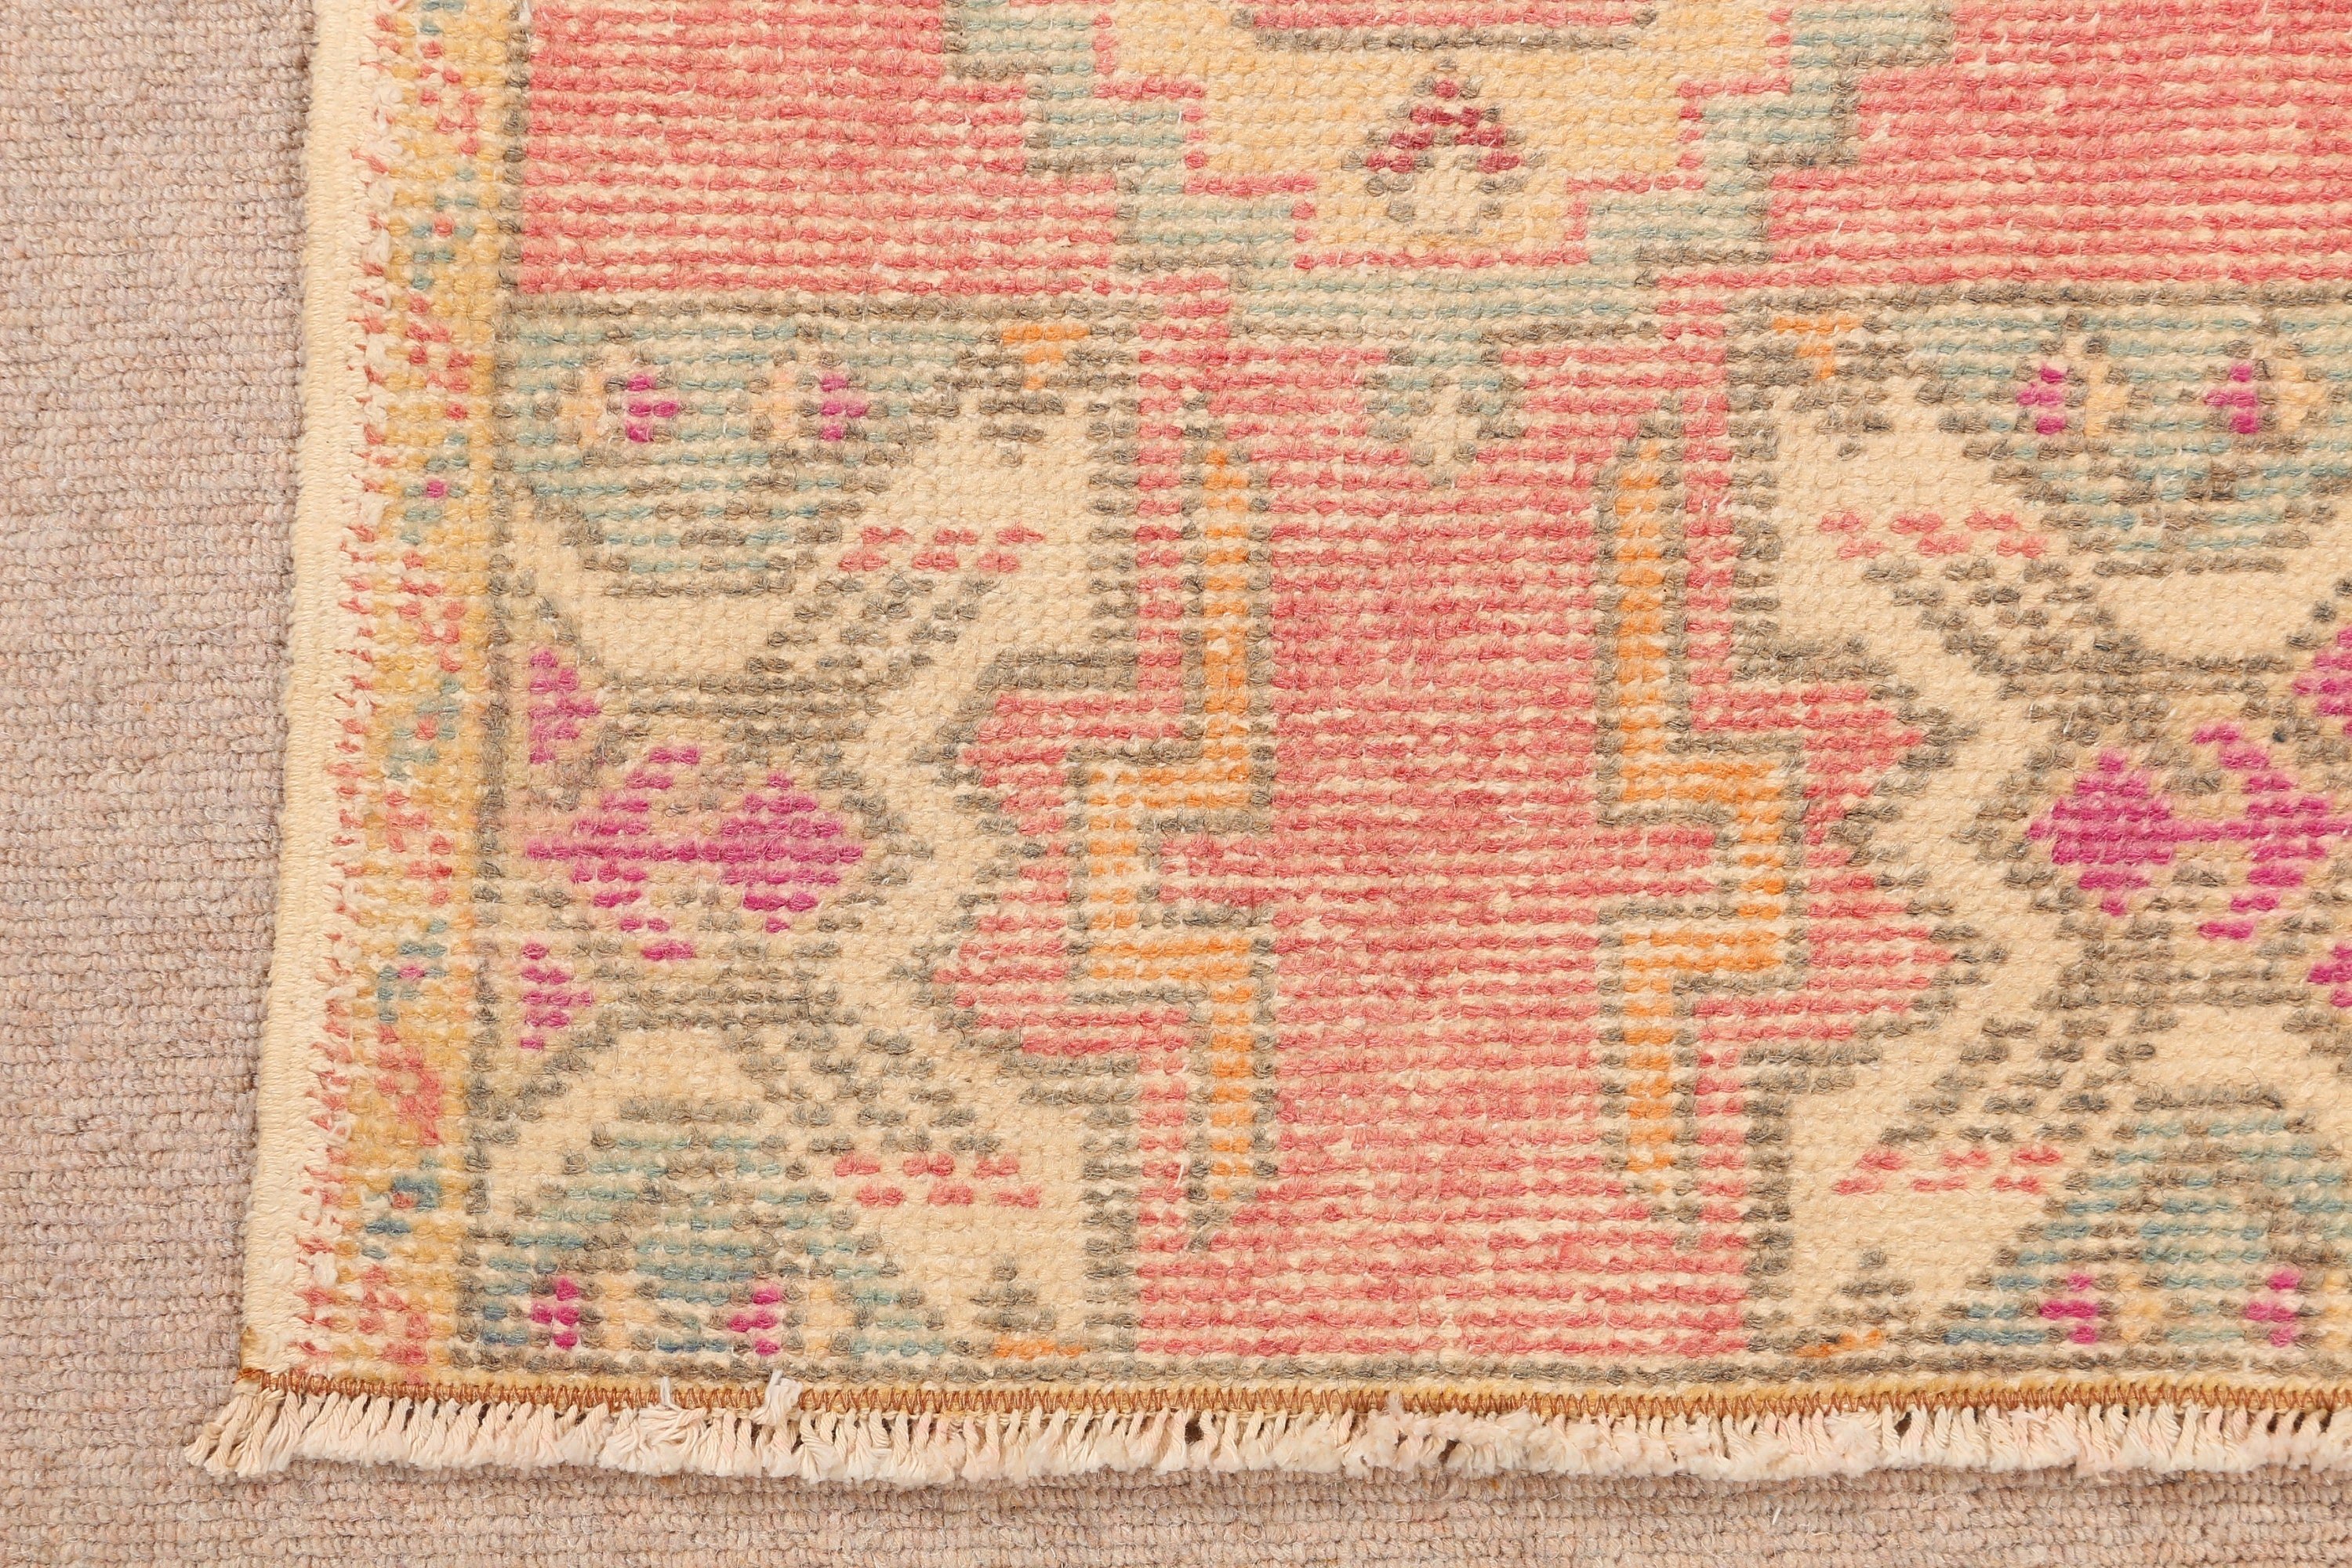 Antique Rugs, Turkish Rugs, Vintage Rug, Rugs for Entry, Pink Floor Rug, Kitchen Rug, Door Mat Rug, 1.6x2.8 ft Small Rugs